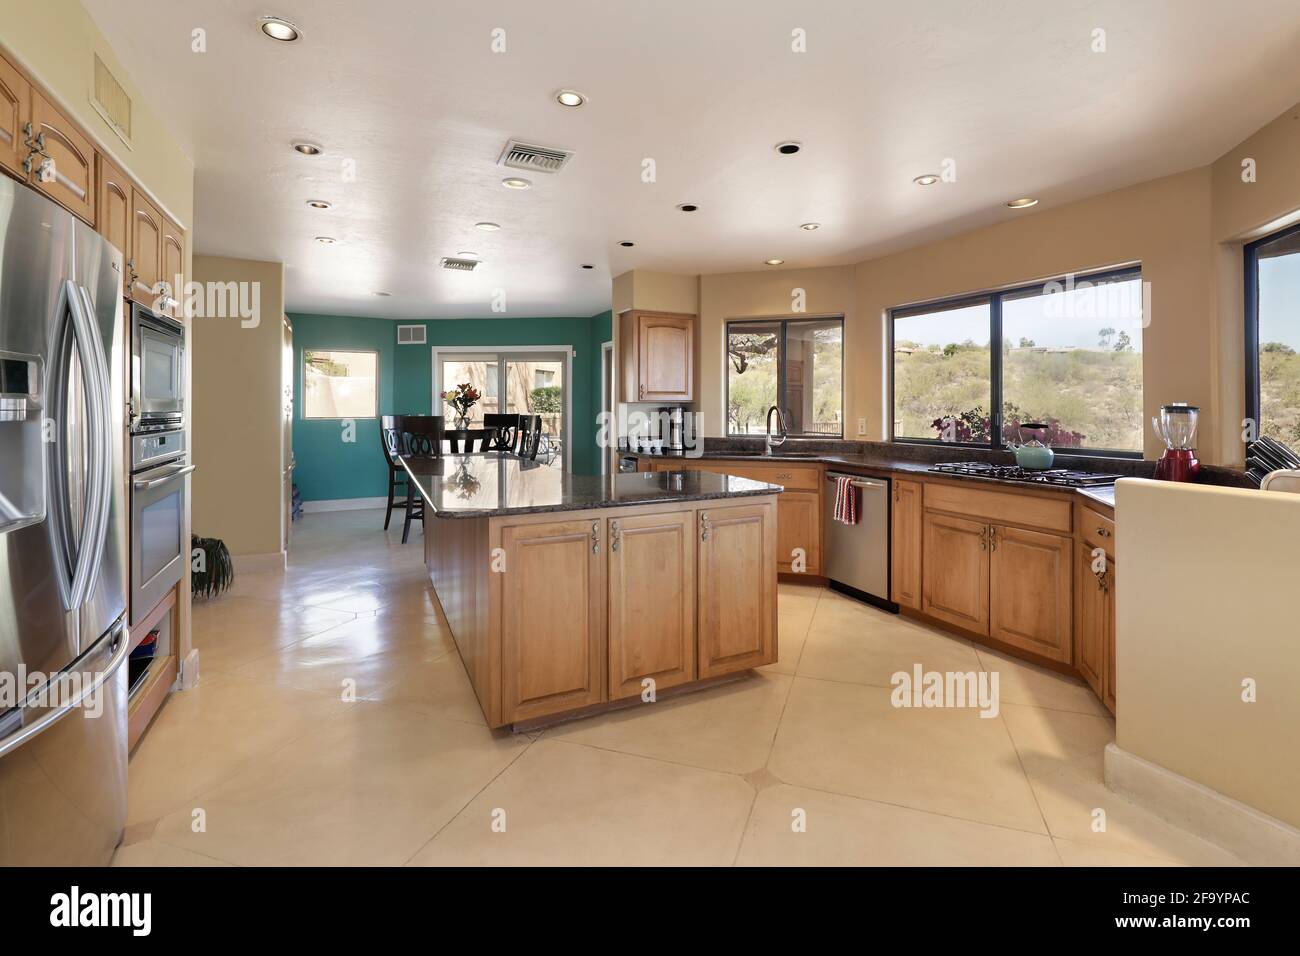 Kitchen in luxury home with center island and eating area Stock Photo